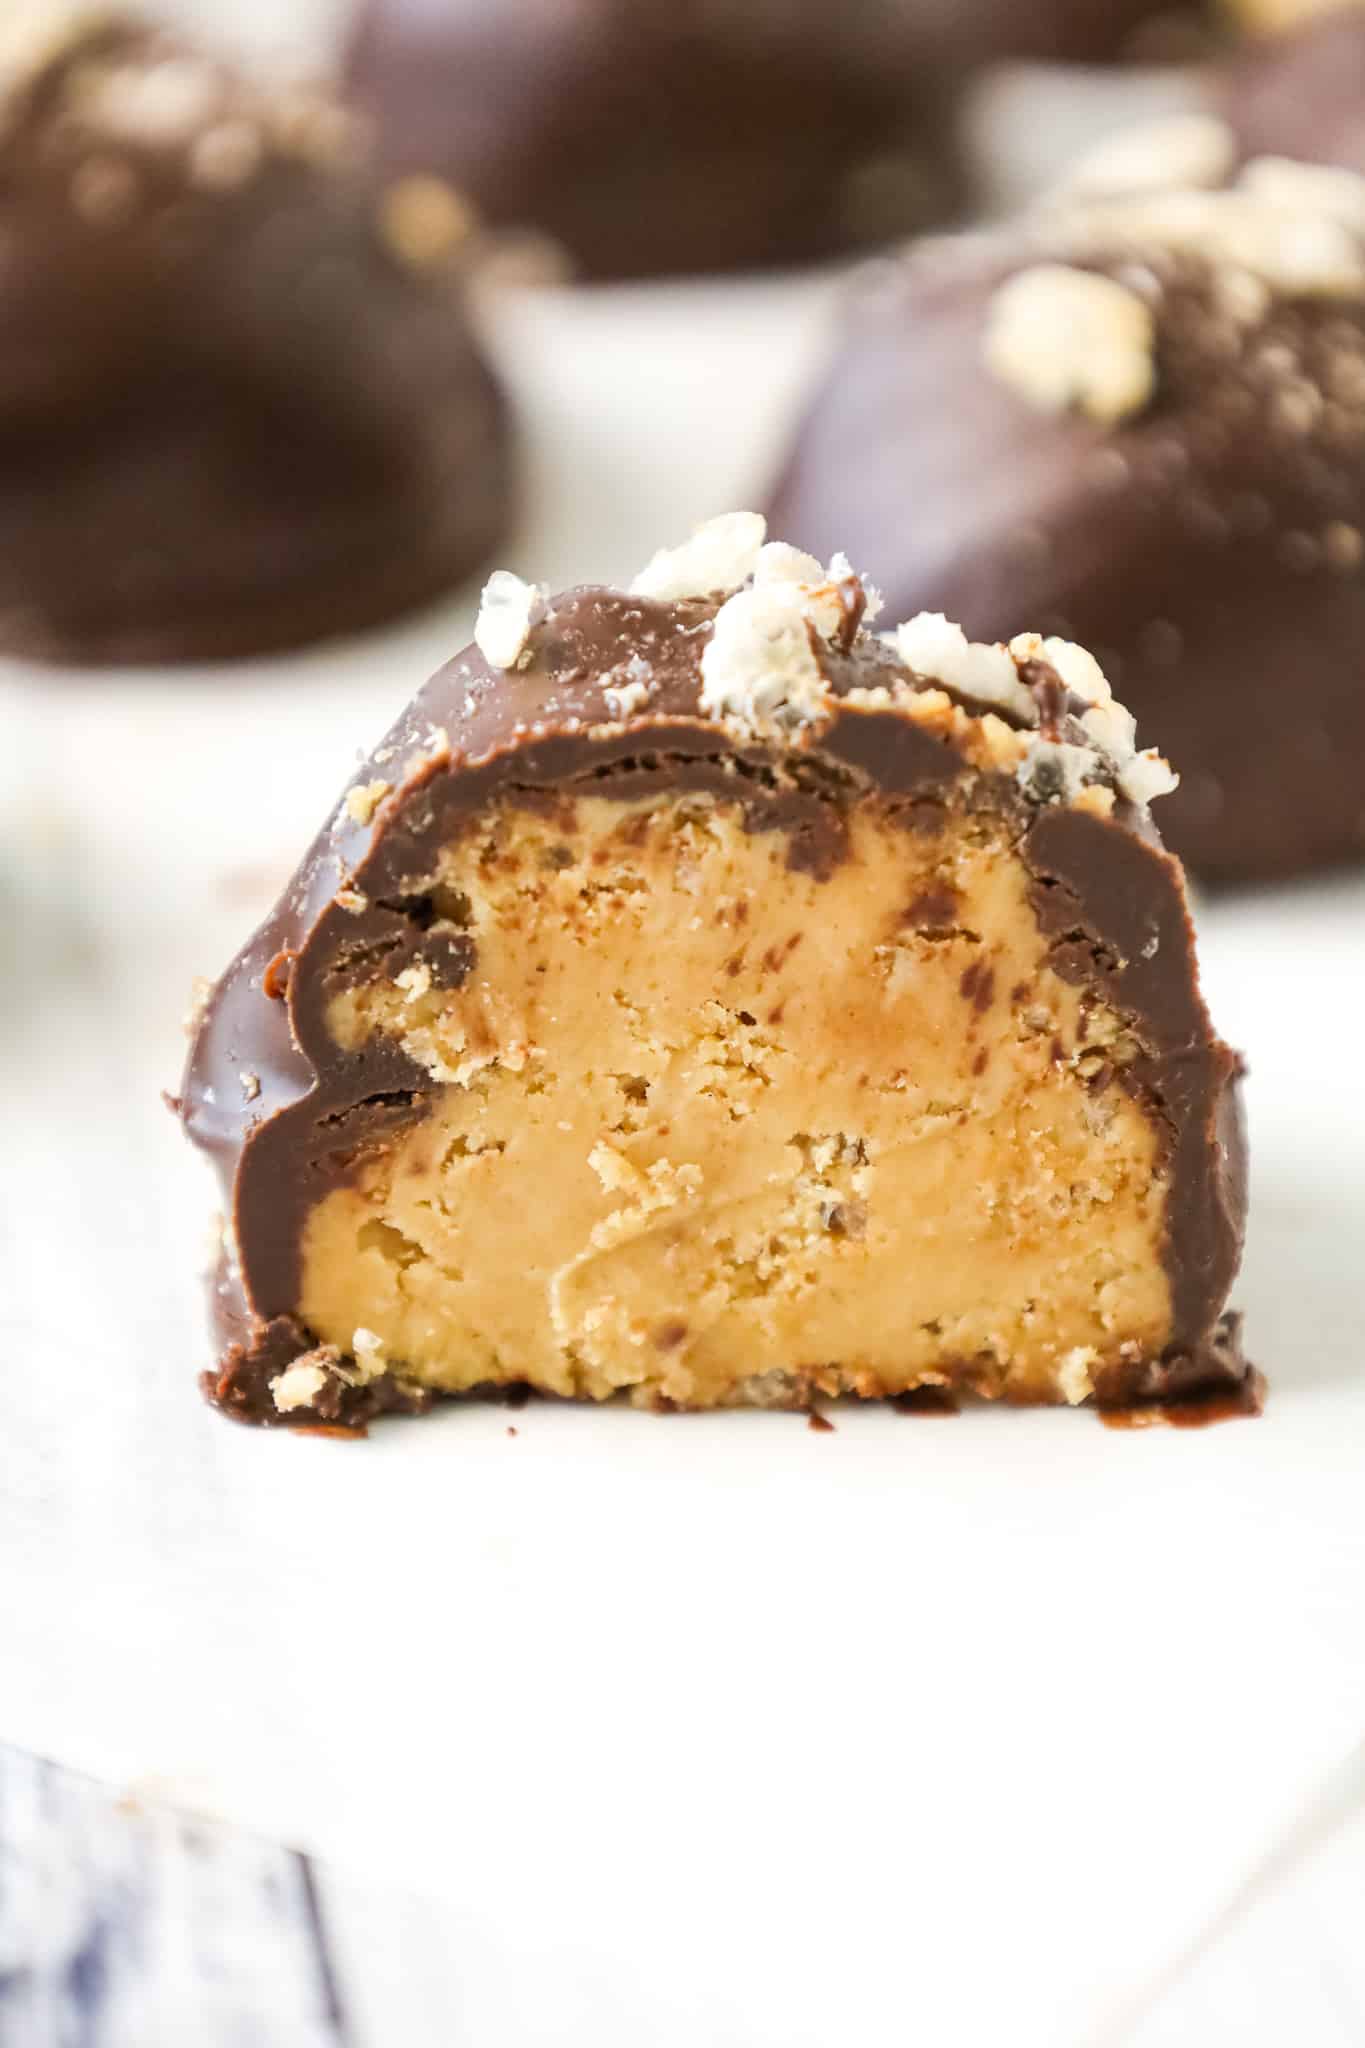 Peanut Butter Balls with Rice Krispies are a decadent no bake chocolate peanut butter dessert.